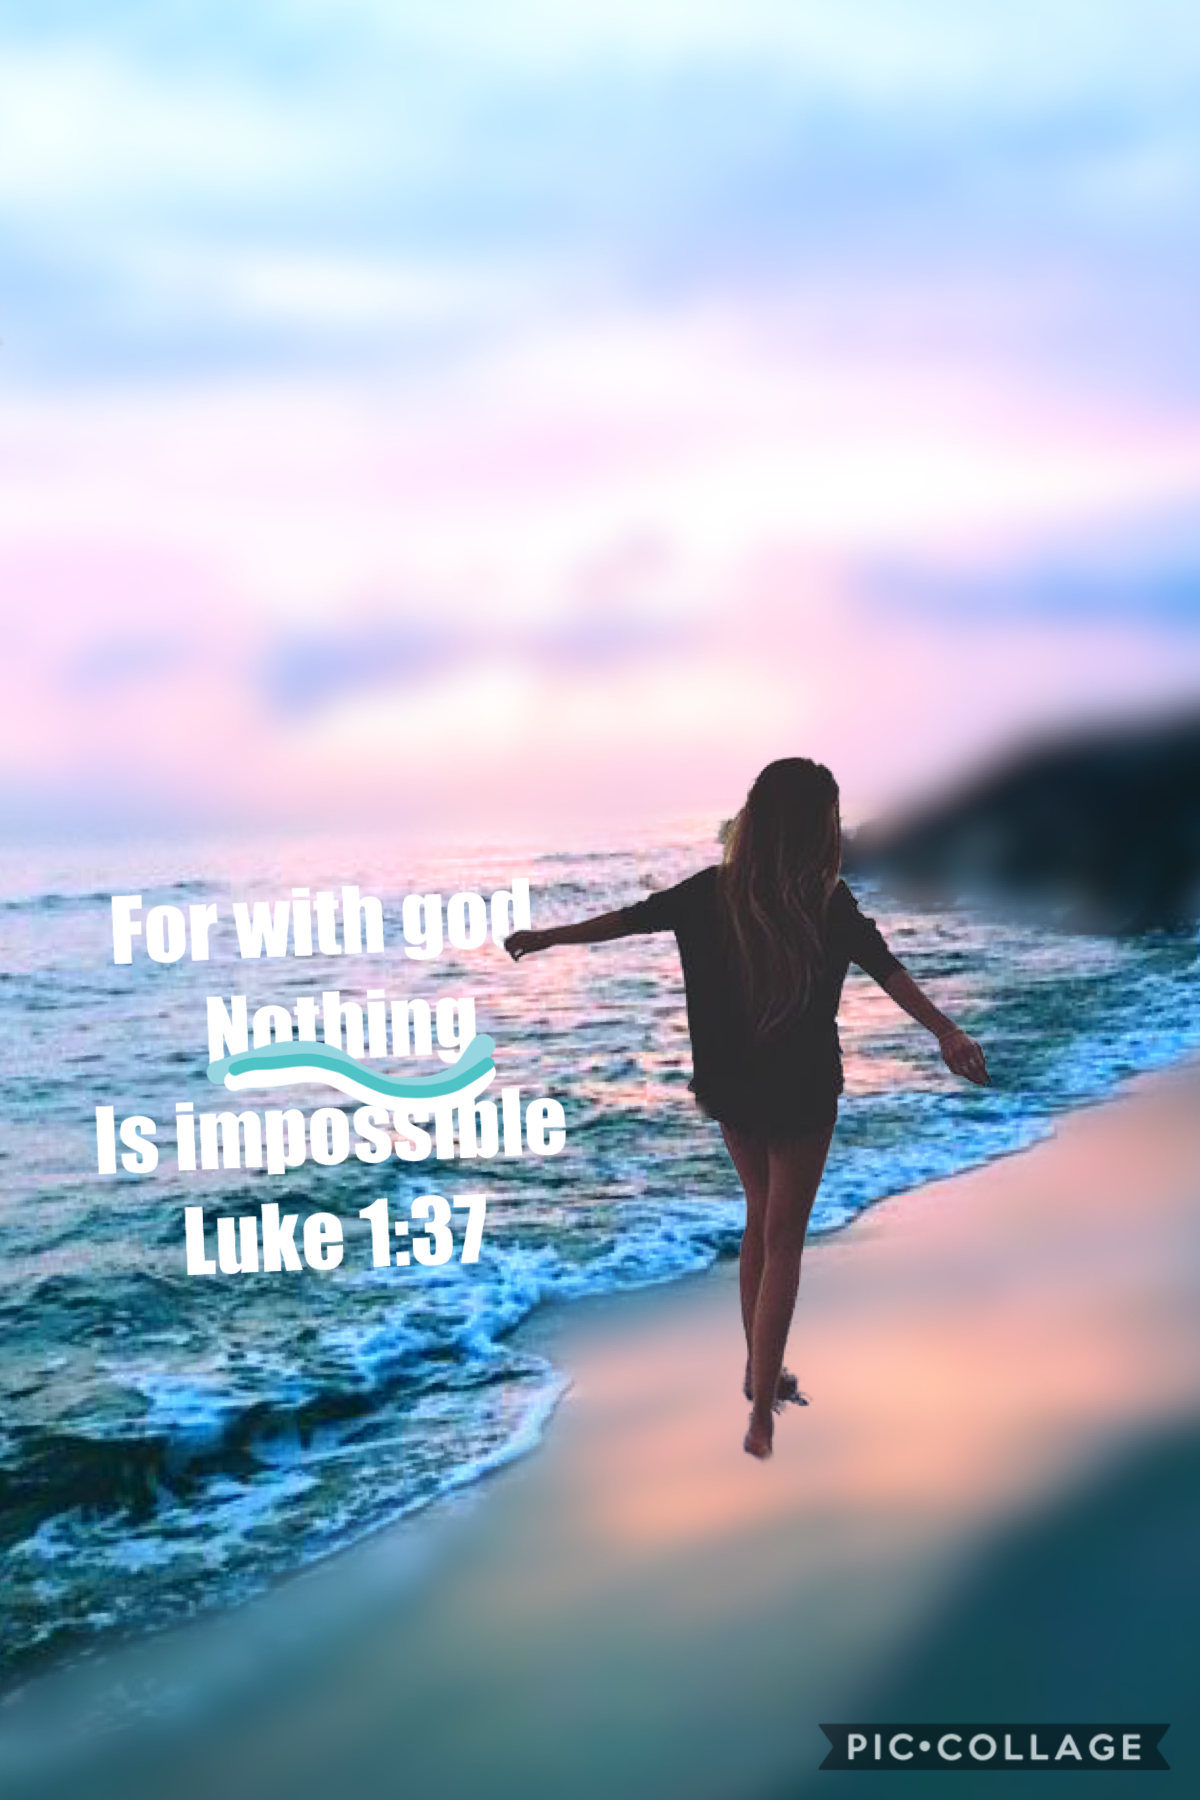 For with god nothing is impossible 
Luke 1:37 
💙tap💙:)
